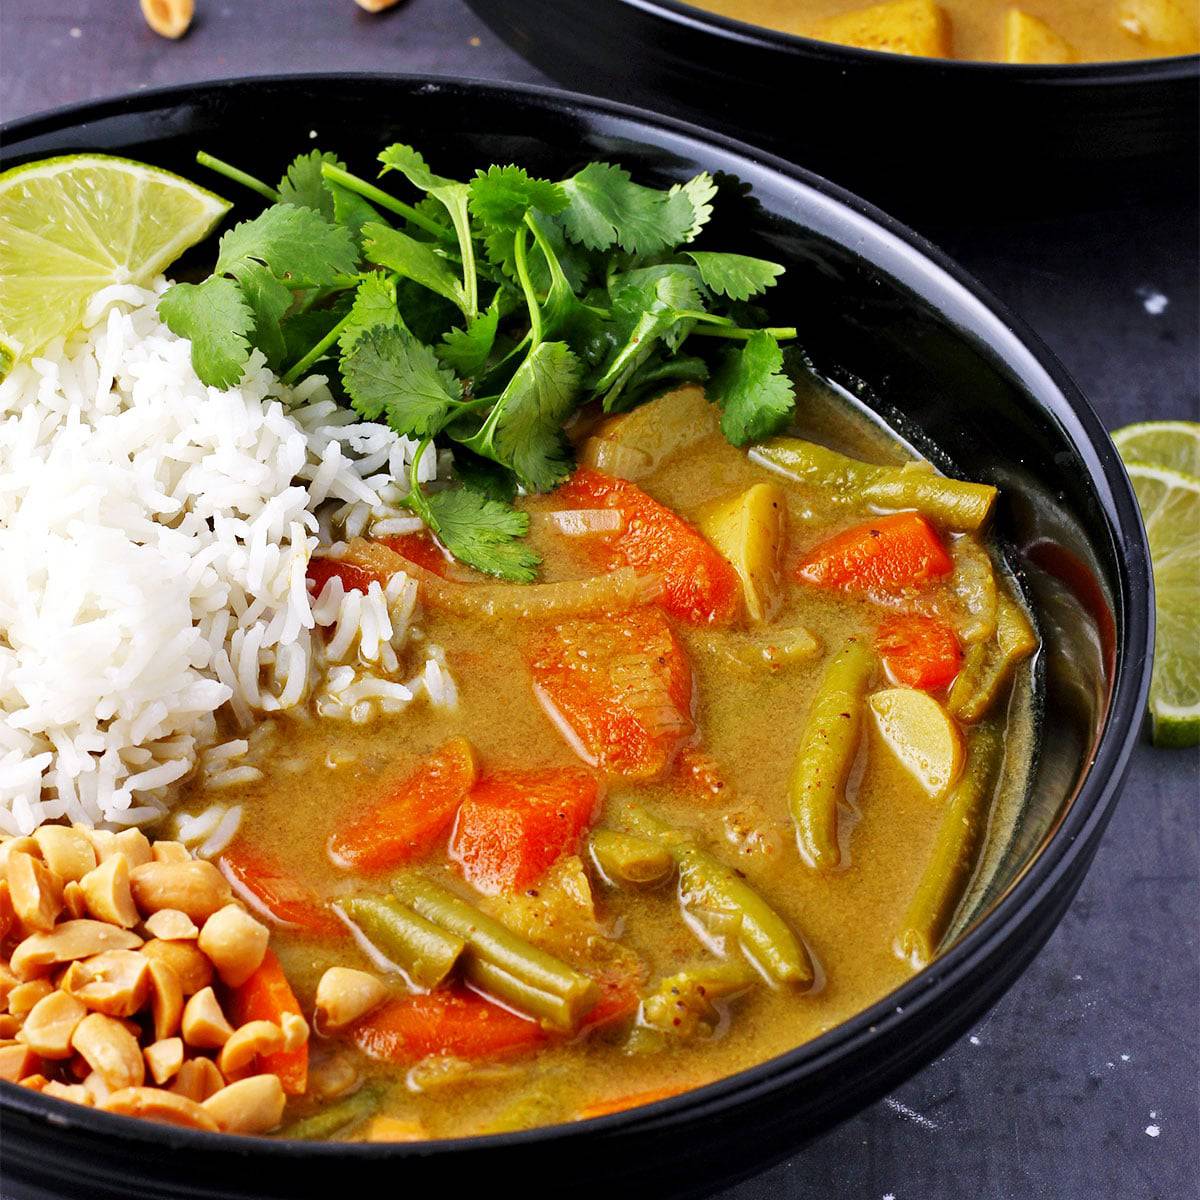 Veggie massaman curry with potaotes, green beans, carrots, onions and massaman curry paste with rice, chopped peanuts and cilantro